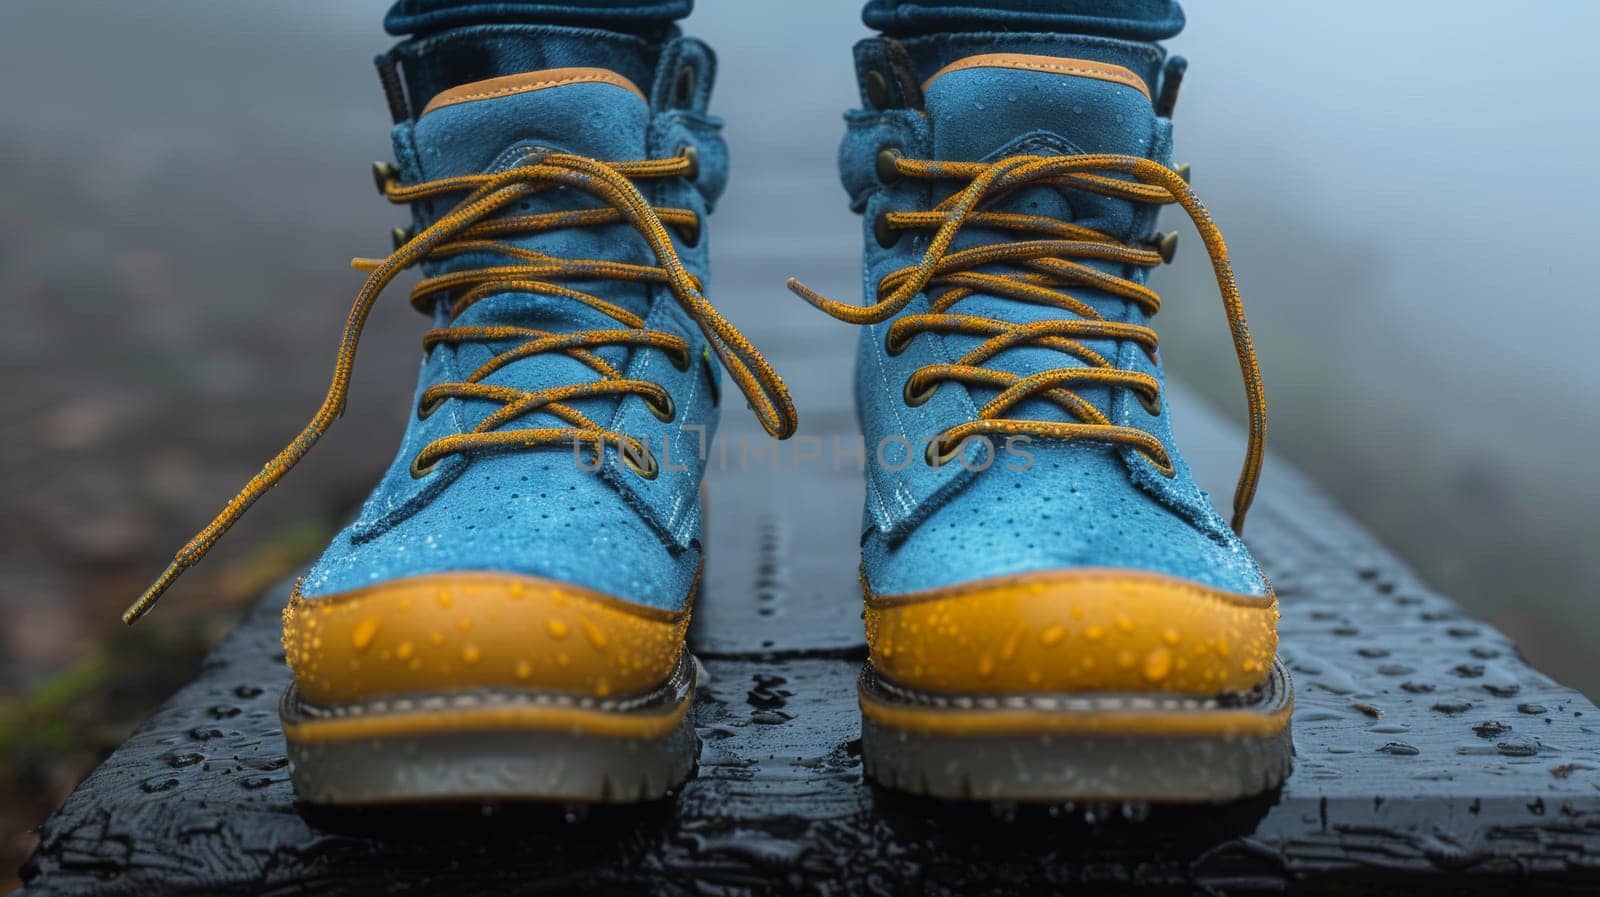 A person wearing blue and yellow boots standing on a wooden platform, AI by starush